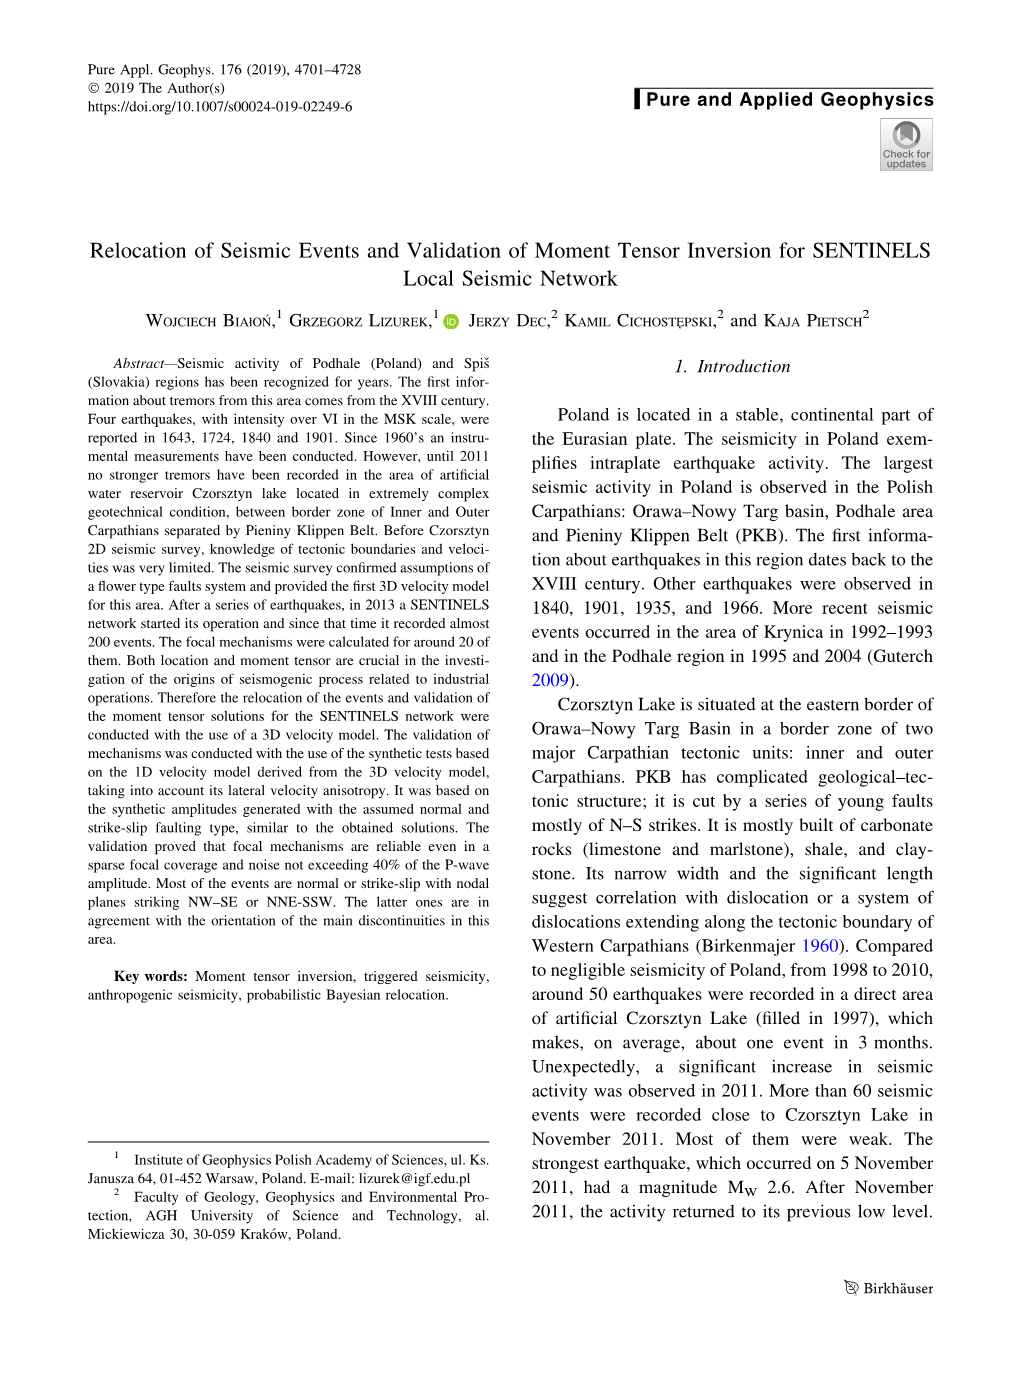 Relocation of Seismic Events and Validation of Moment Tensor Inversion for SENTINELS Local Seismic Network